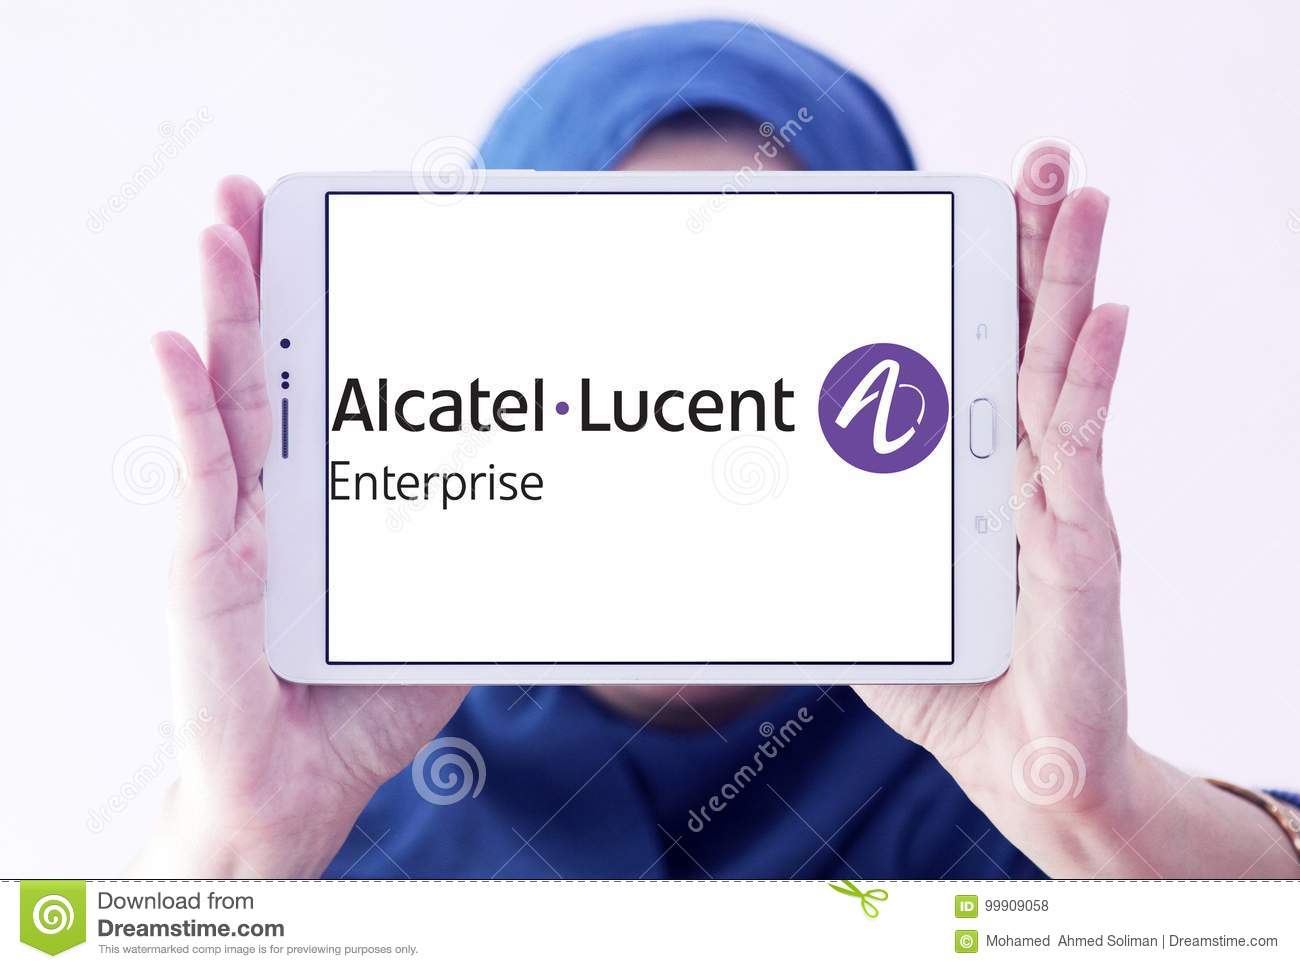 alcatel lucent software